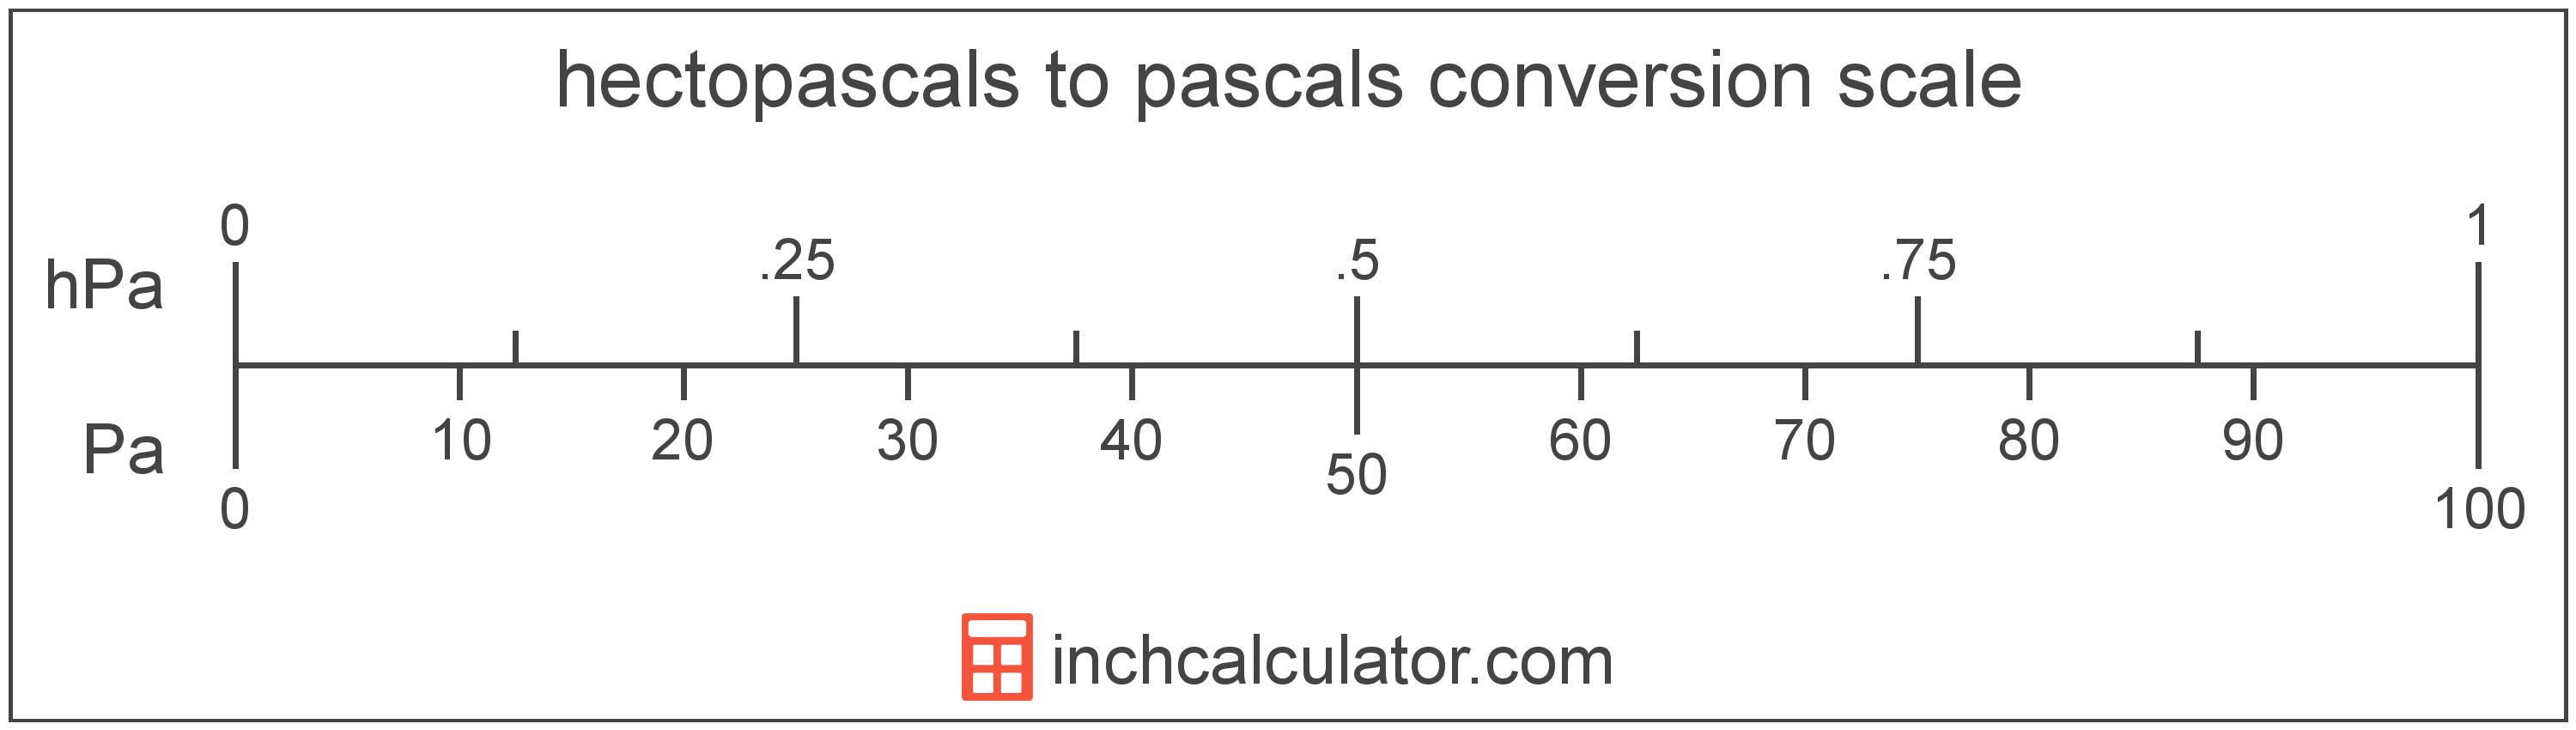 conversion scale showing hectopascals and equivalent pascals pressure values